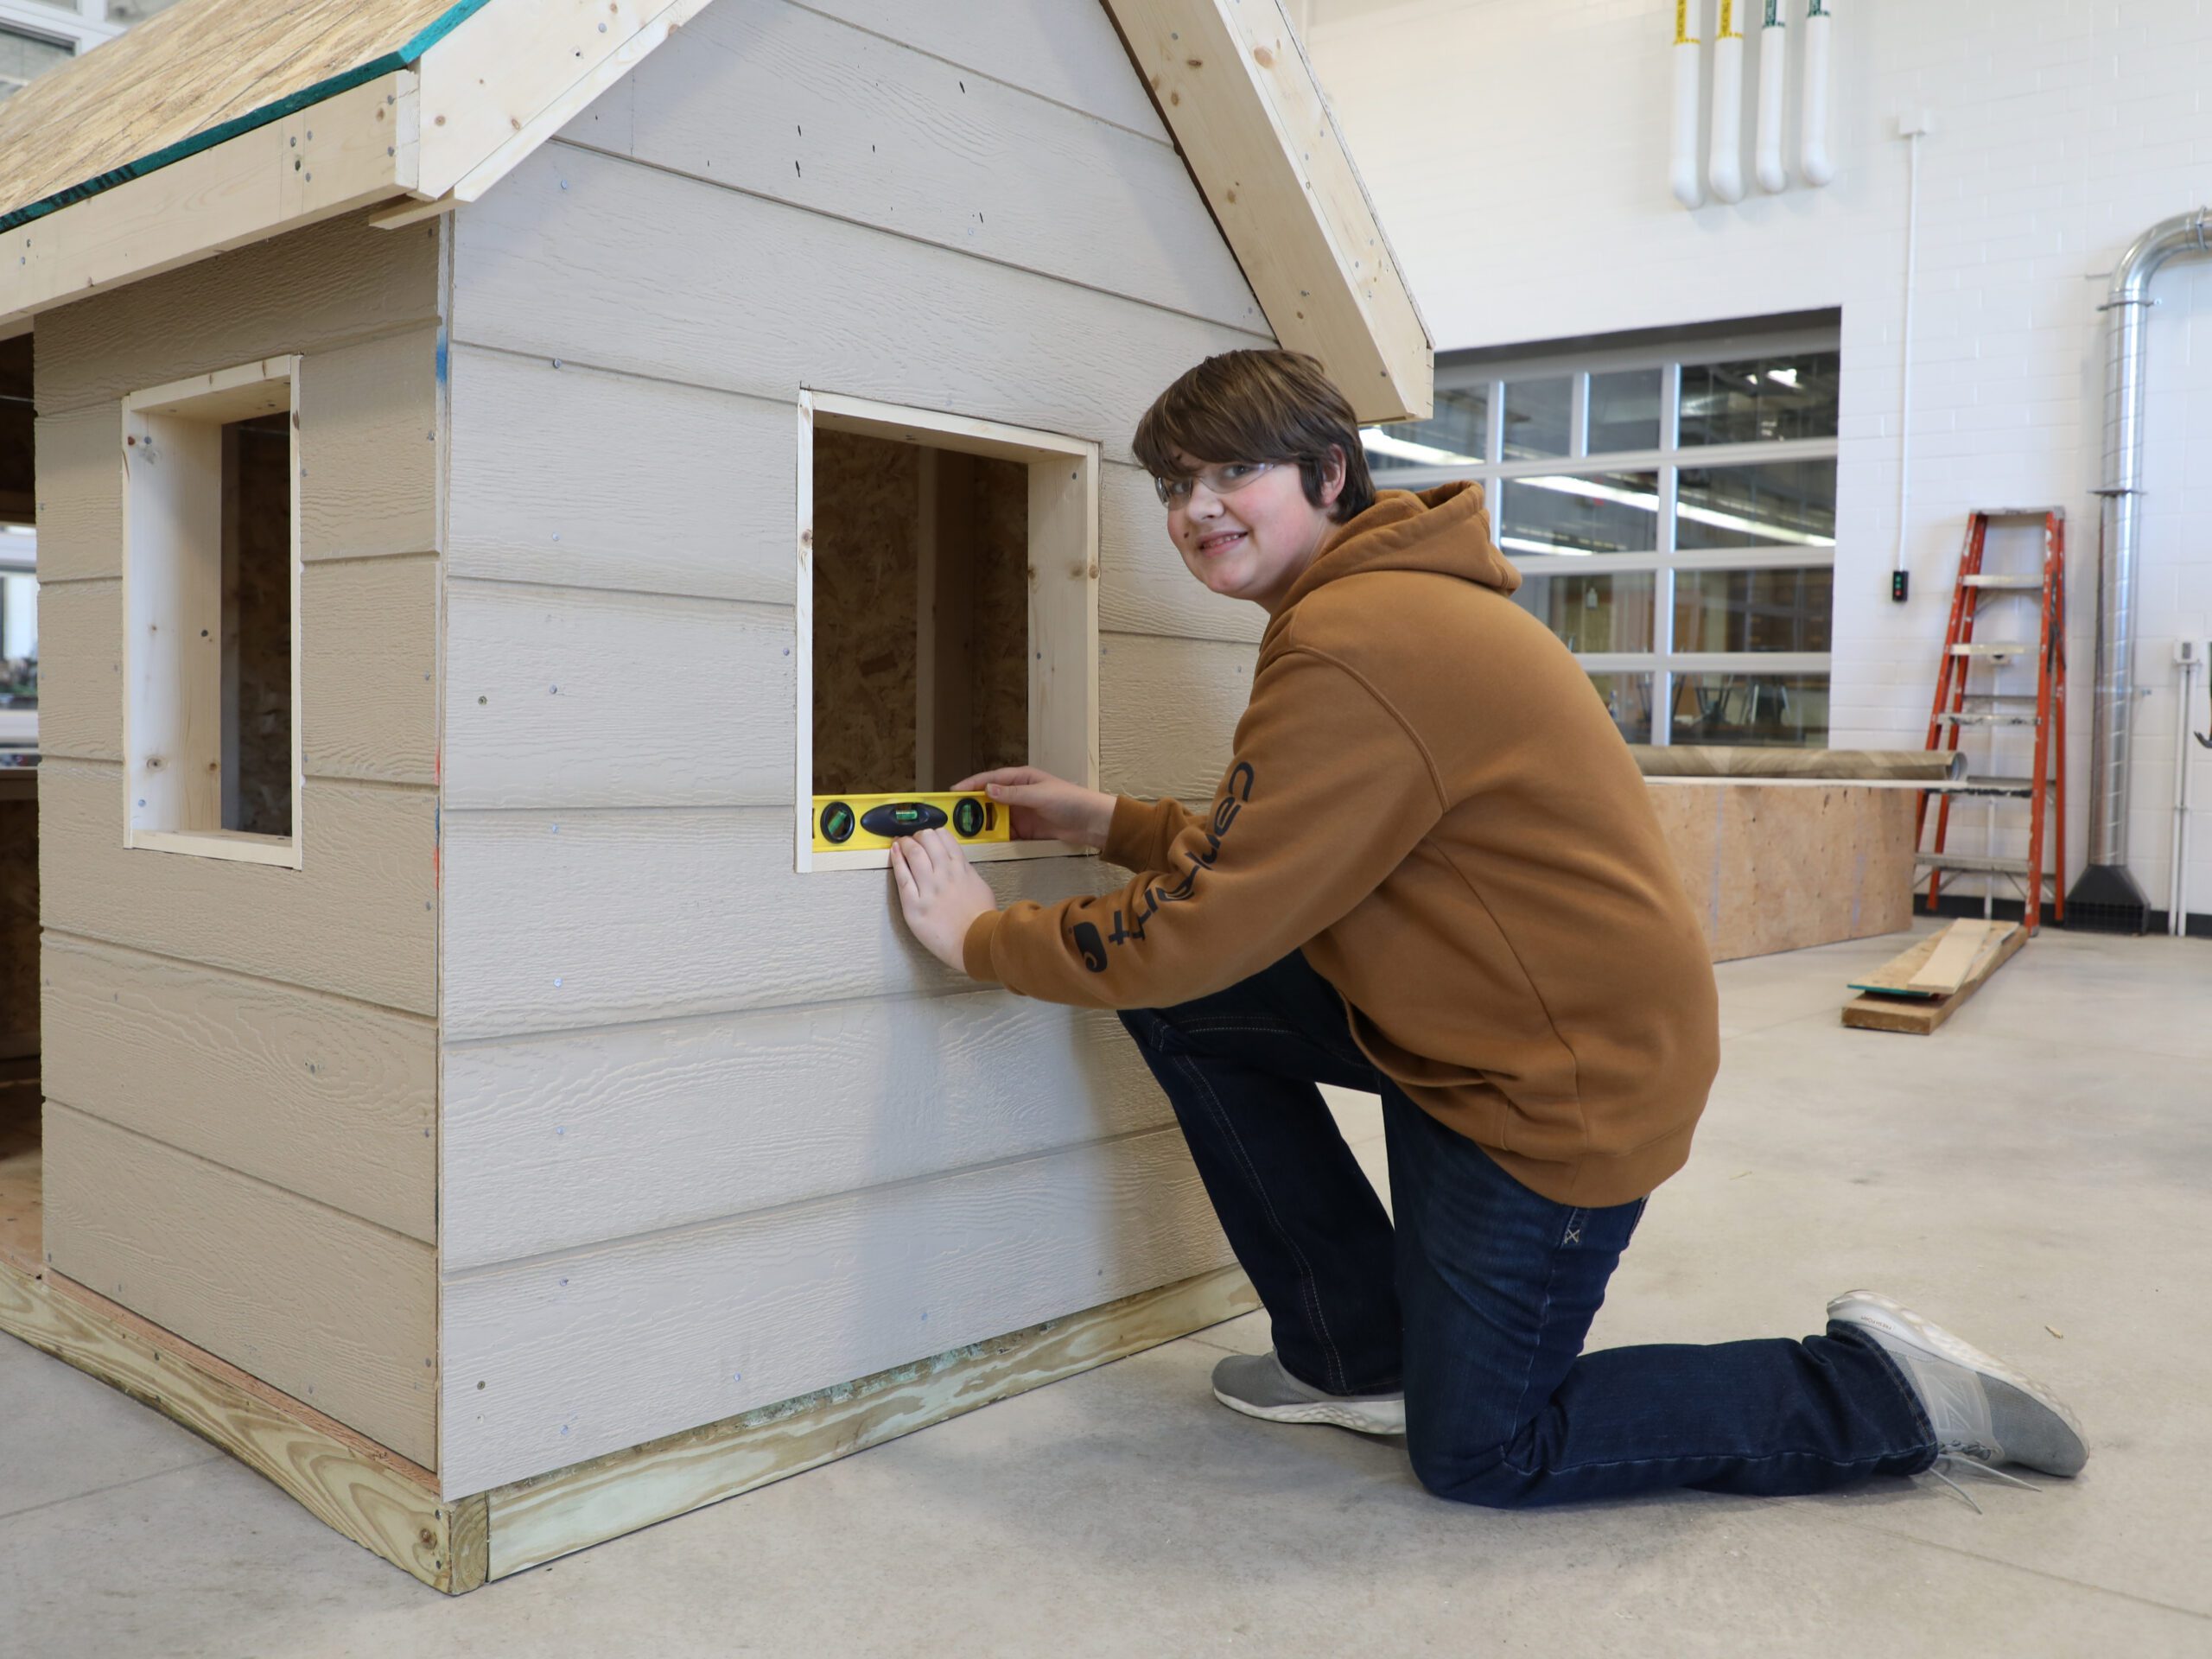 A student kneels on the shop floor at JCC and uses a level in the window of a small shed being built.